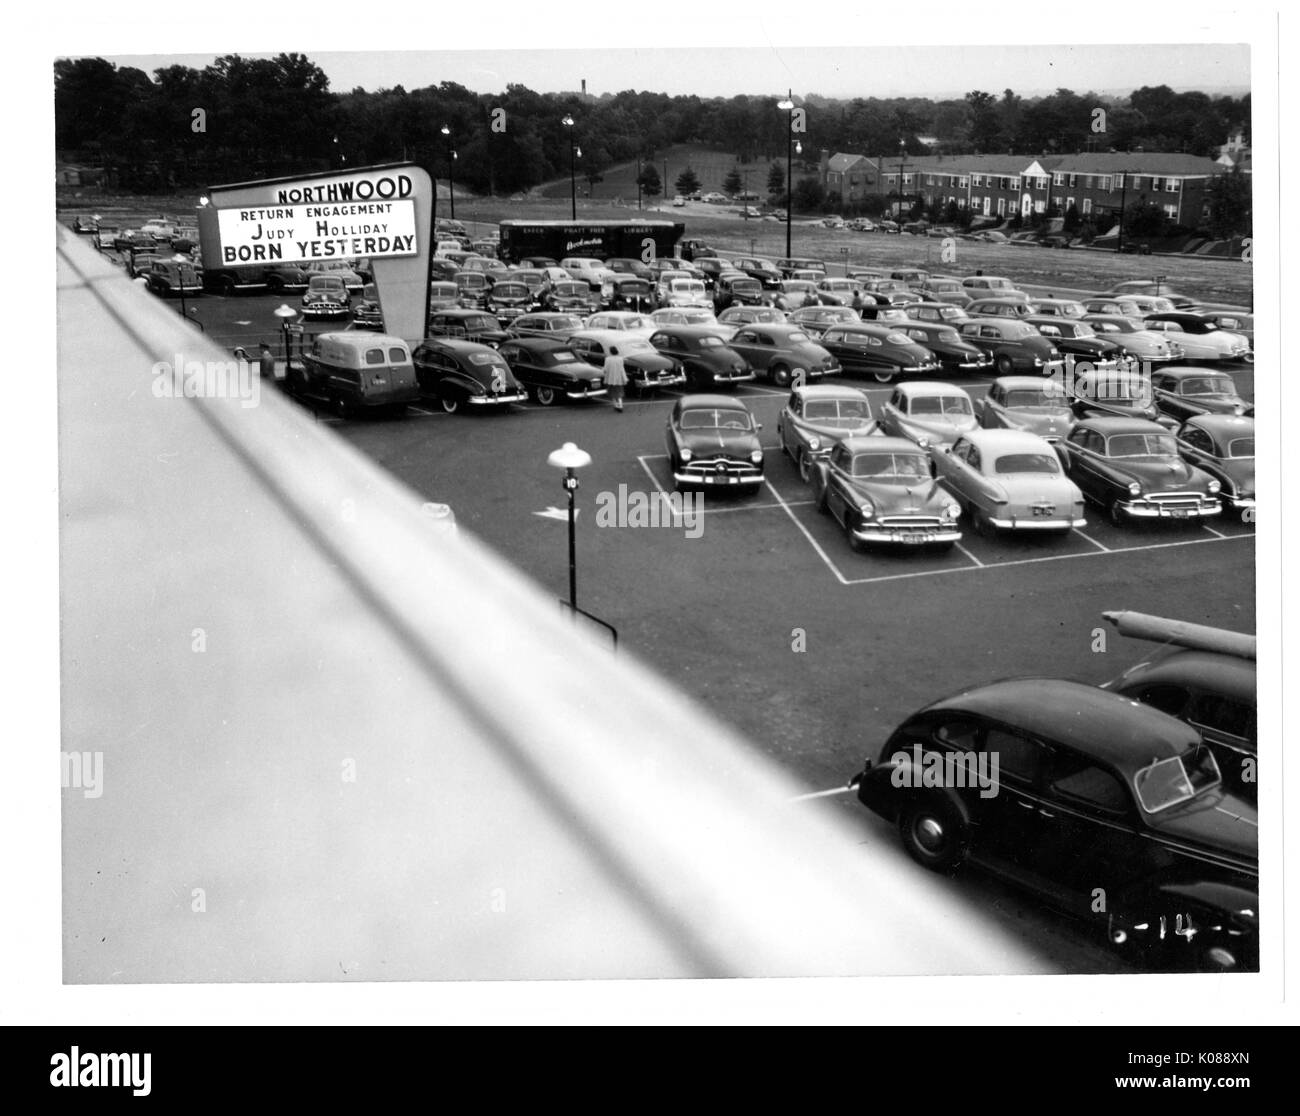 View of a packed parking lot from the roof of the Northwood Shopping Center, across the street from the center and parking lot are brick row homes, the center's sign is advertising 'RETURN ENGAGEMENT, JUDY HOLIDAY, BORN YESTERDAY', Baltimore, Maryland, 1951. Stock Photo